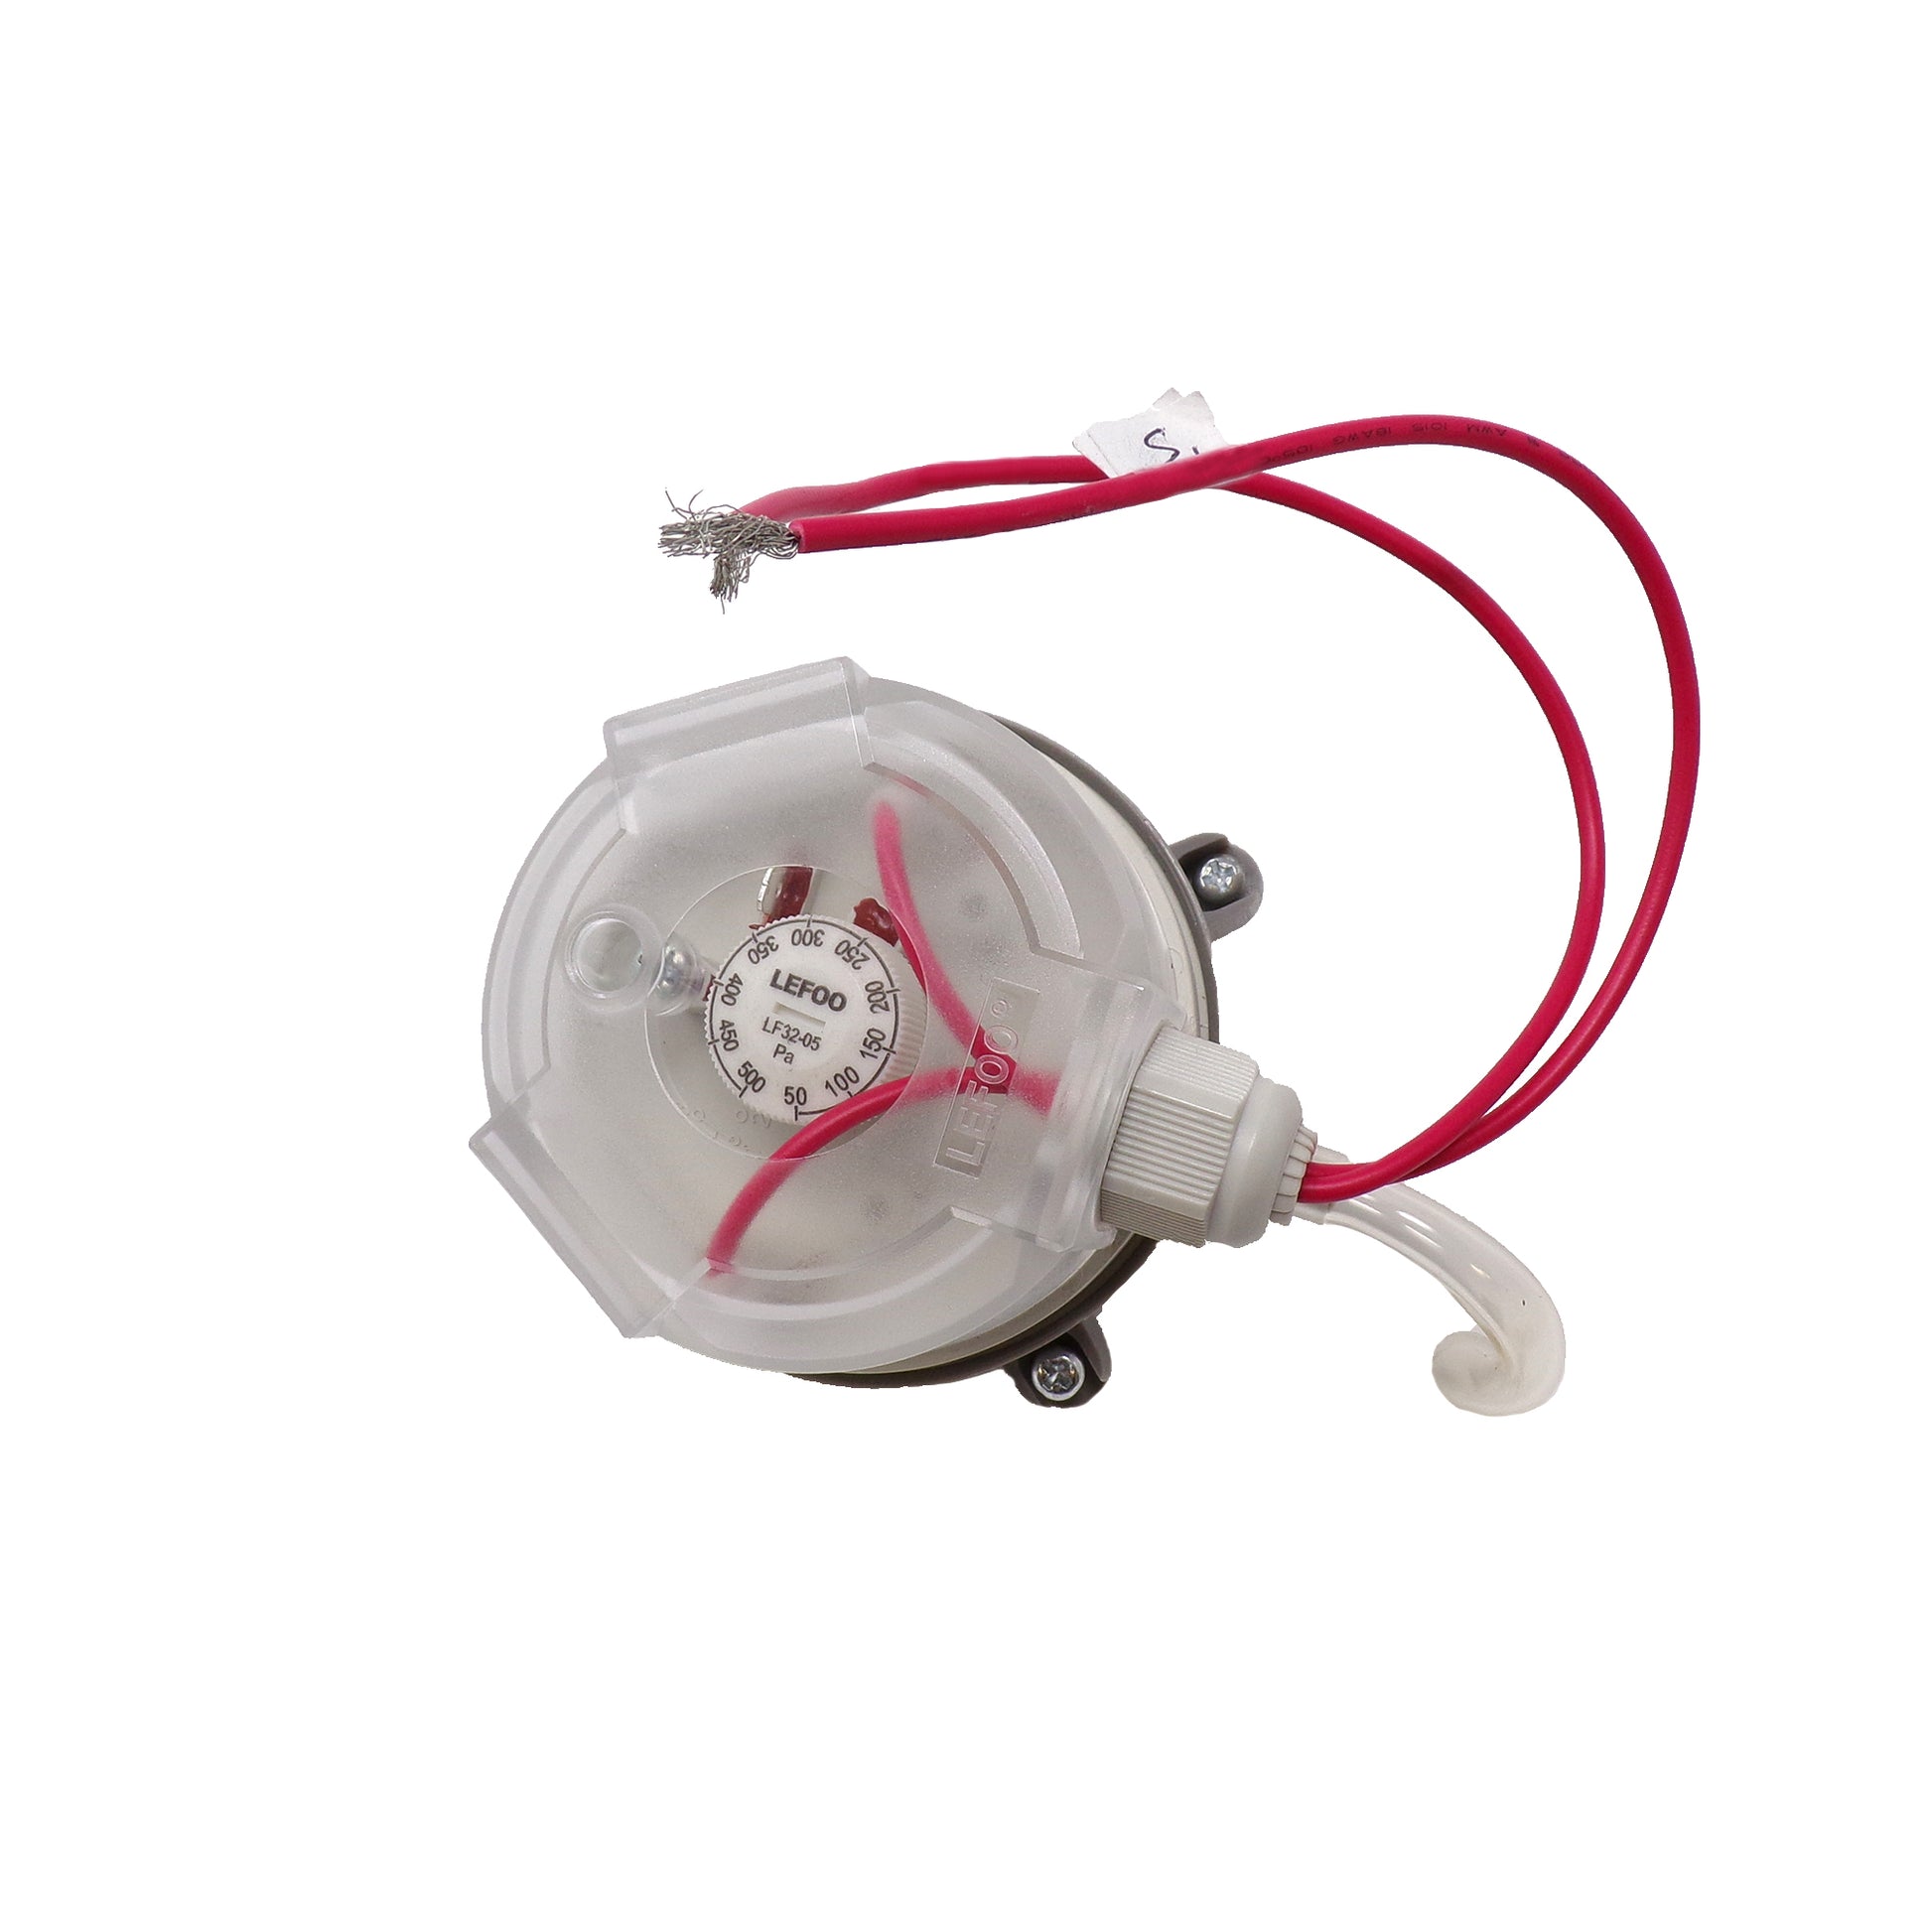 Pressure Switch Filter Light for X-2580 Air Scrubber